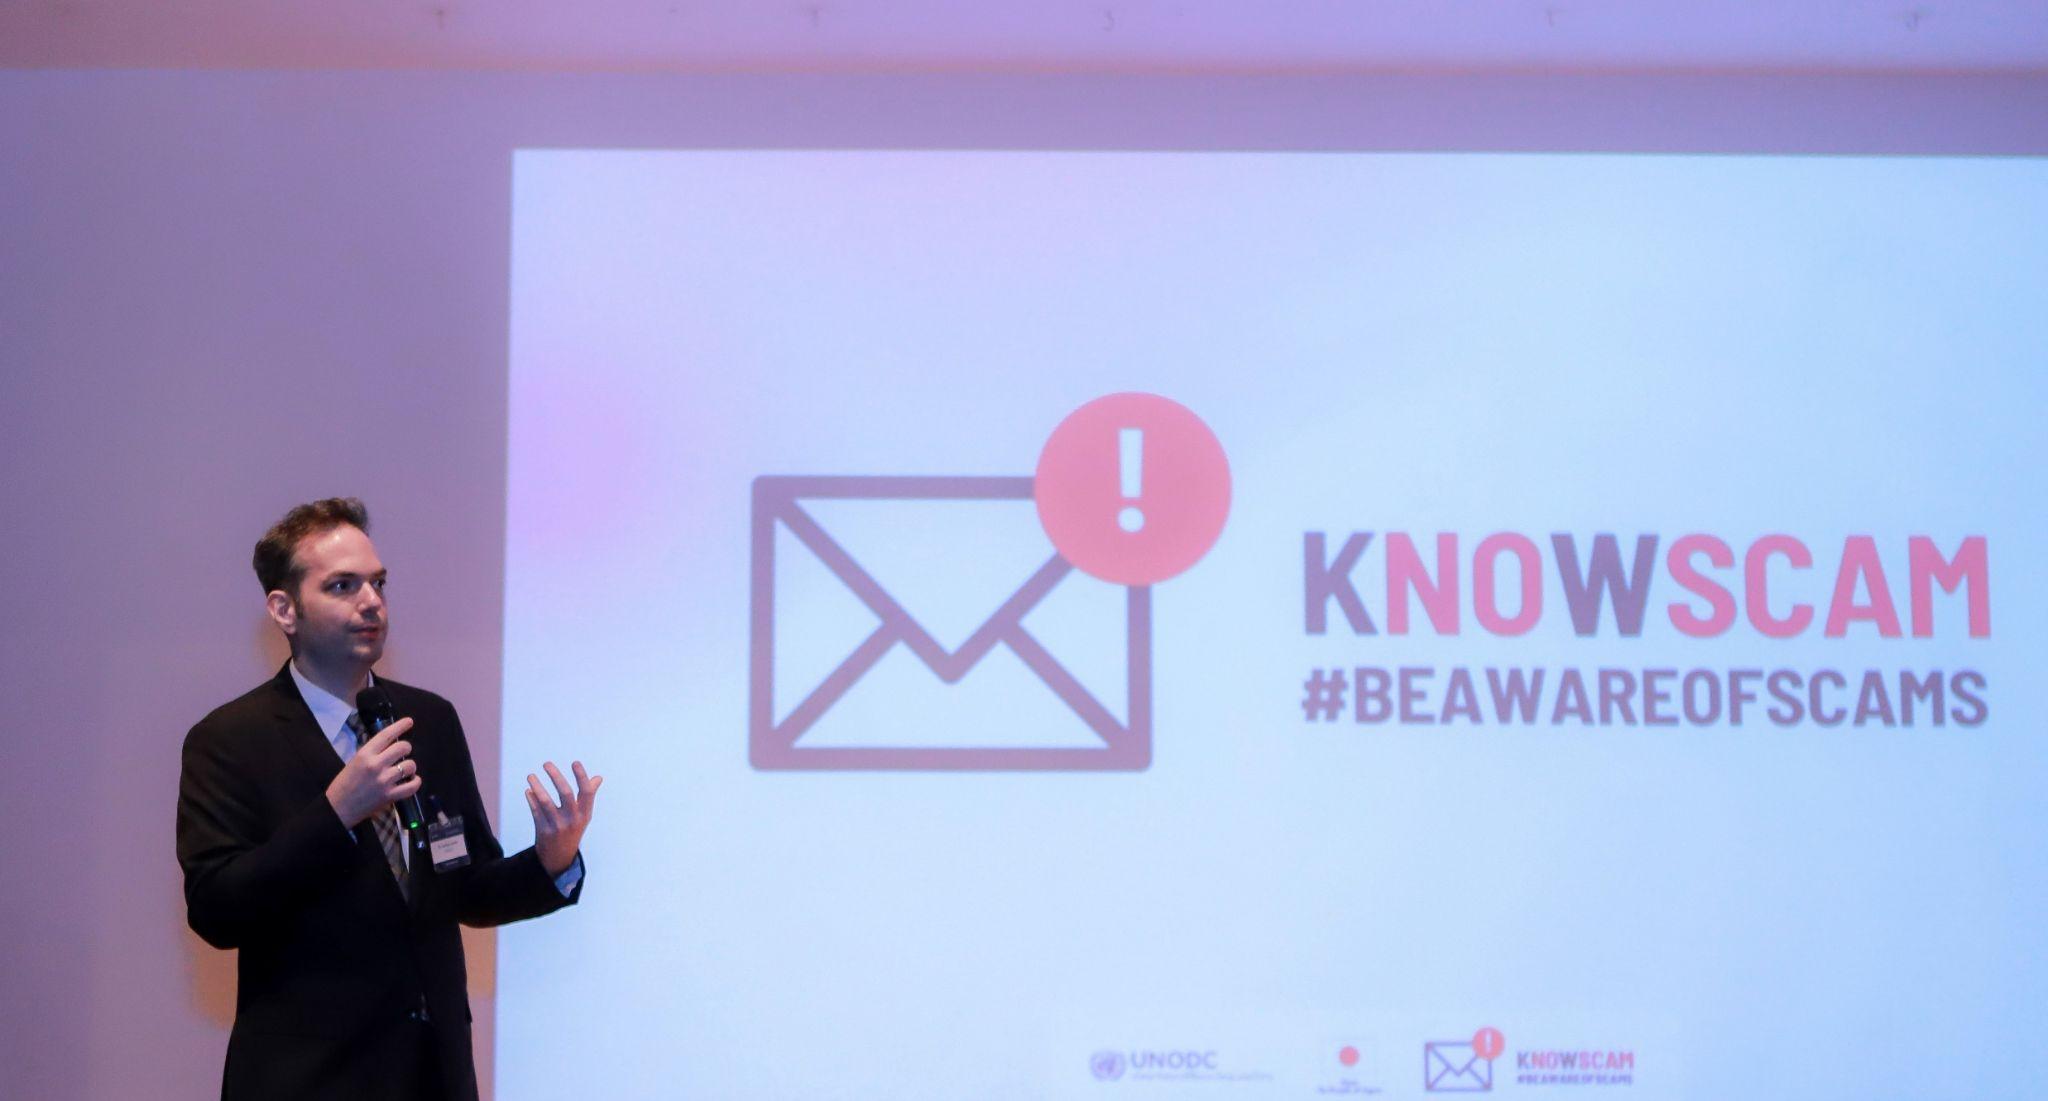 Dr. Joshua James, Regional Counter-Cybercrime Coordinator for Southeast Asia and the Pacific, UNODC, introduces the KNOWSCAM regional campaign on online scams, phishing, and identity theft